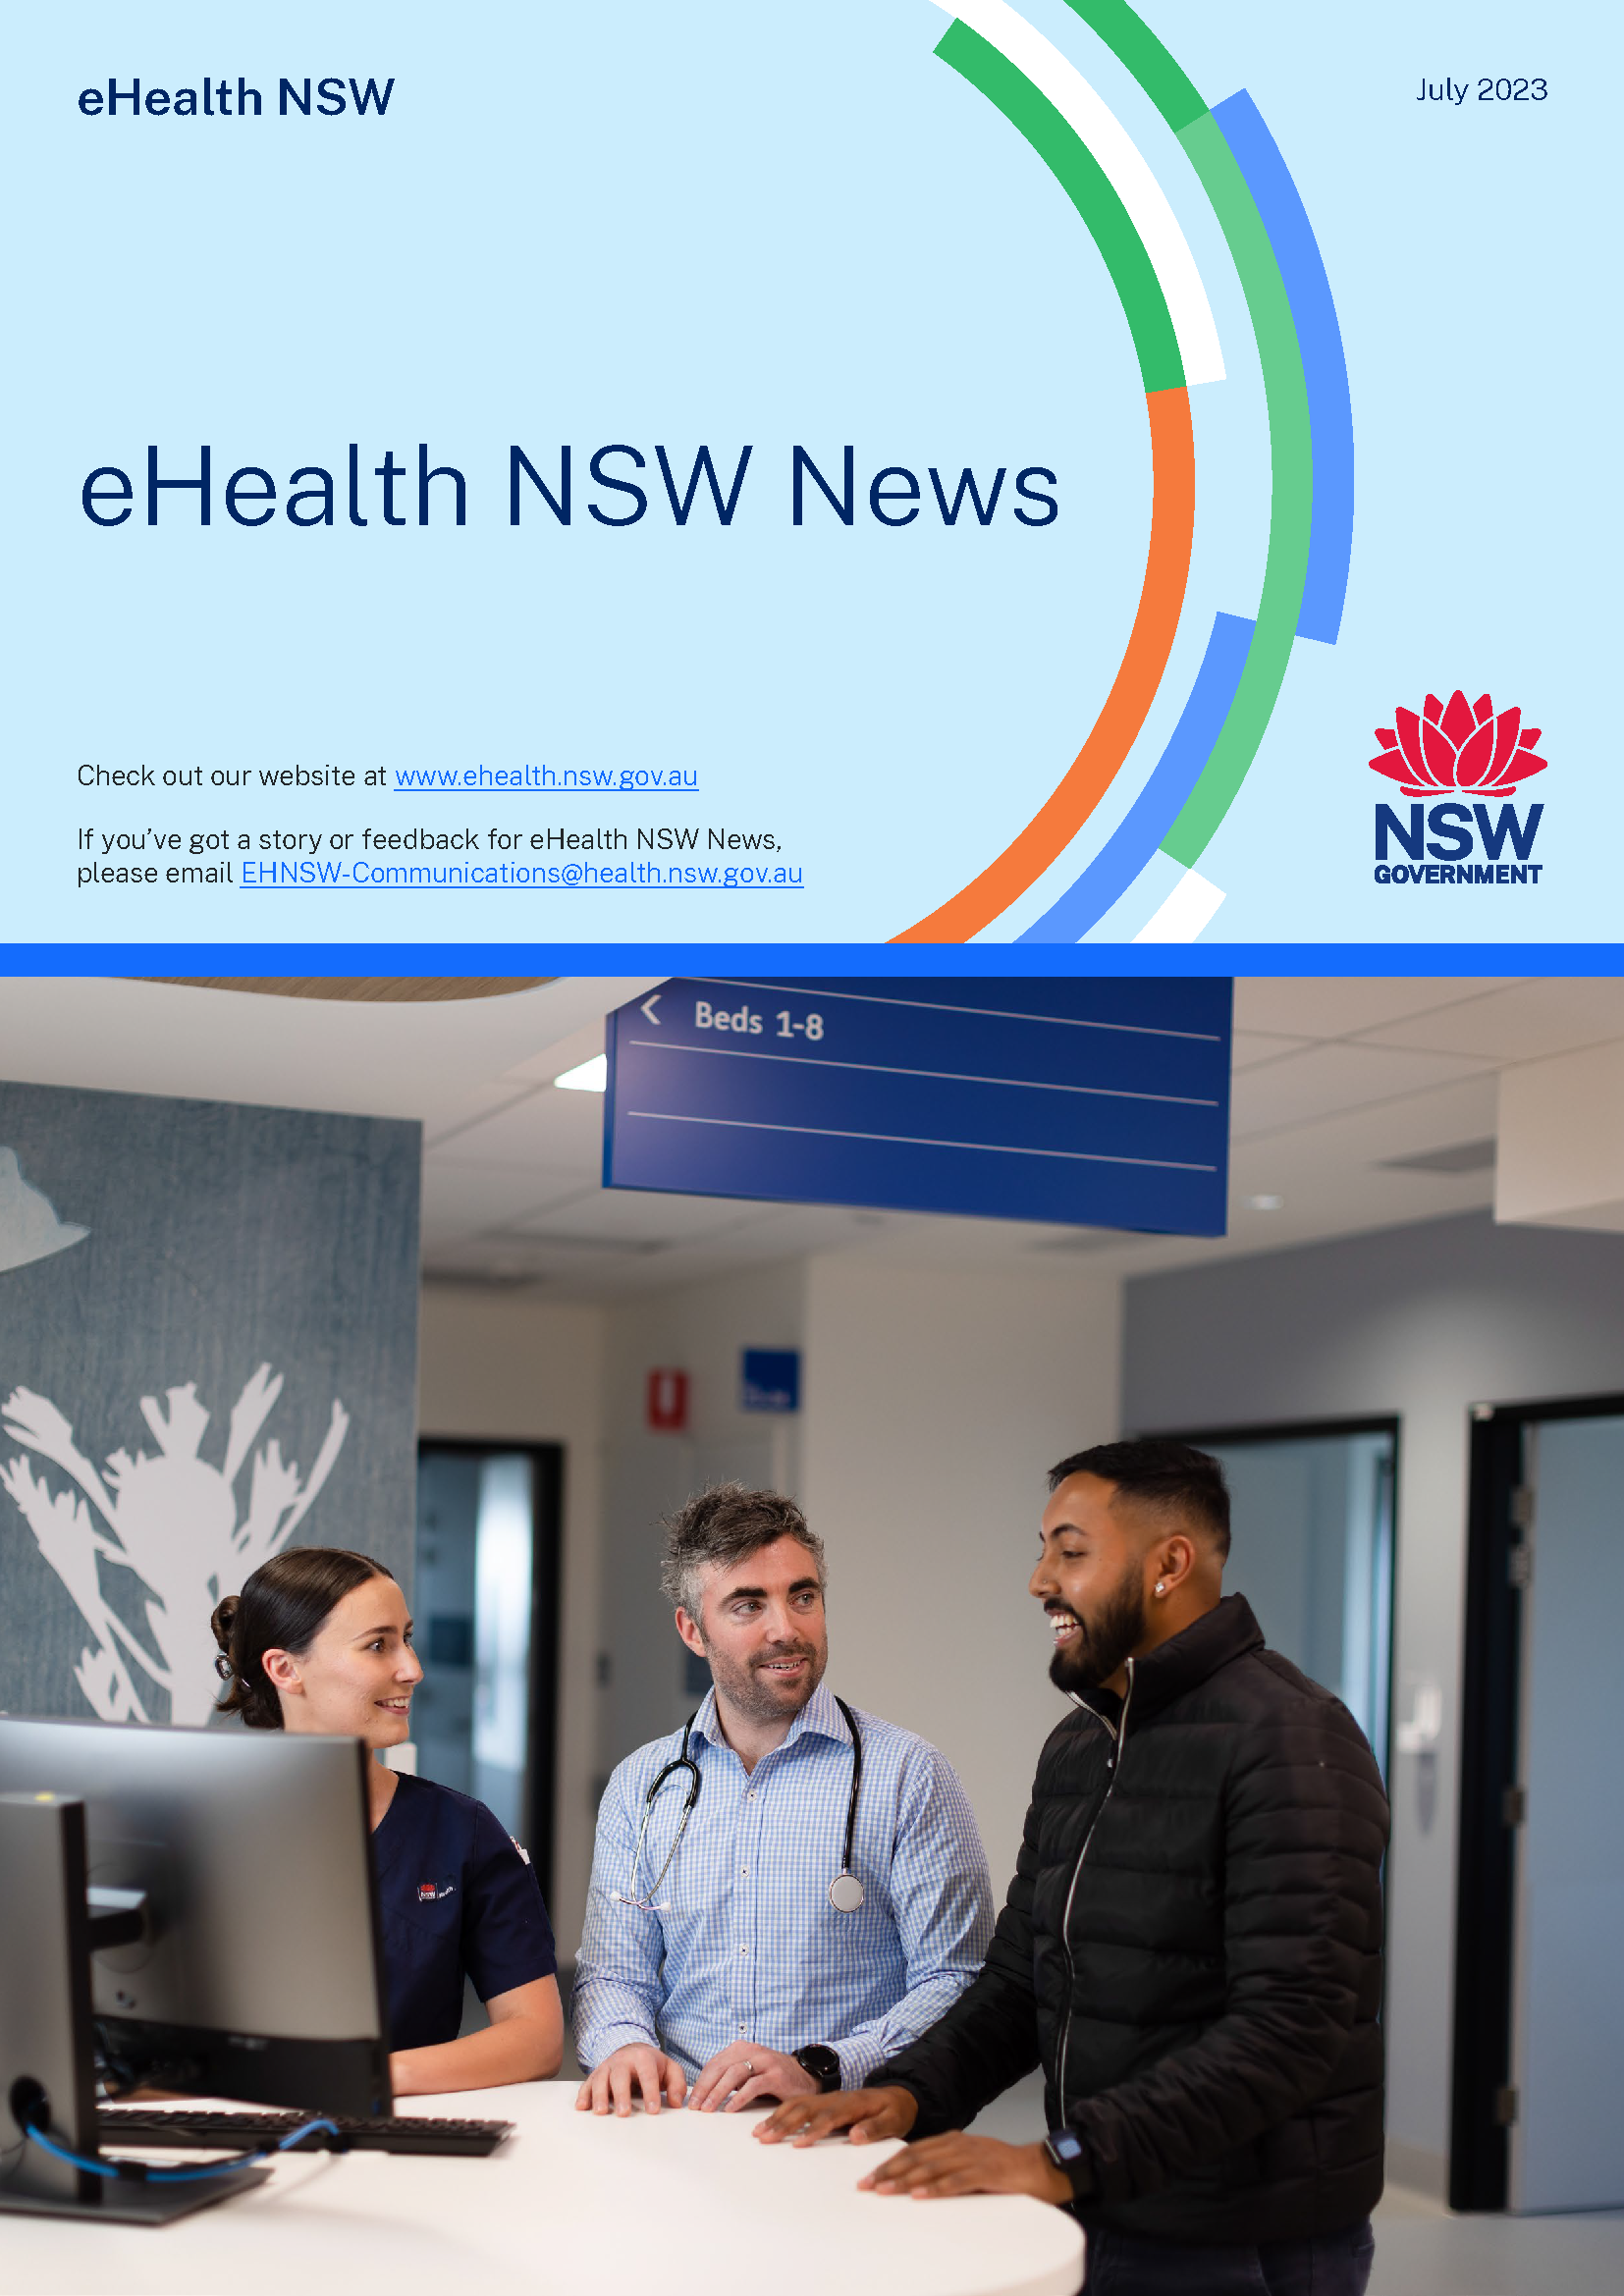 Front cover of the eHealth NSW July 2023 newsletter